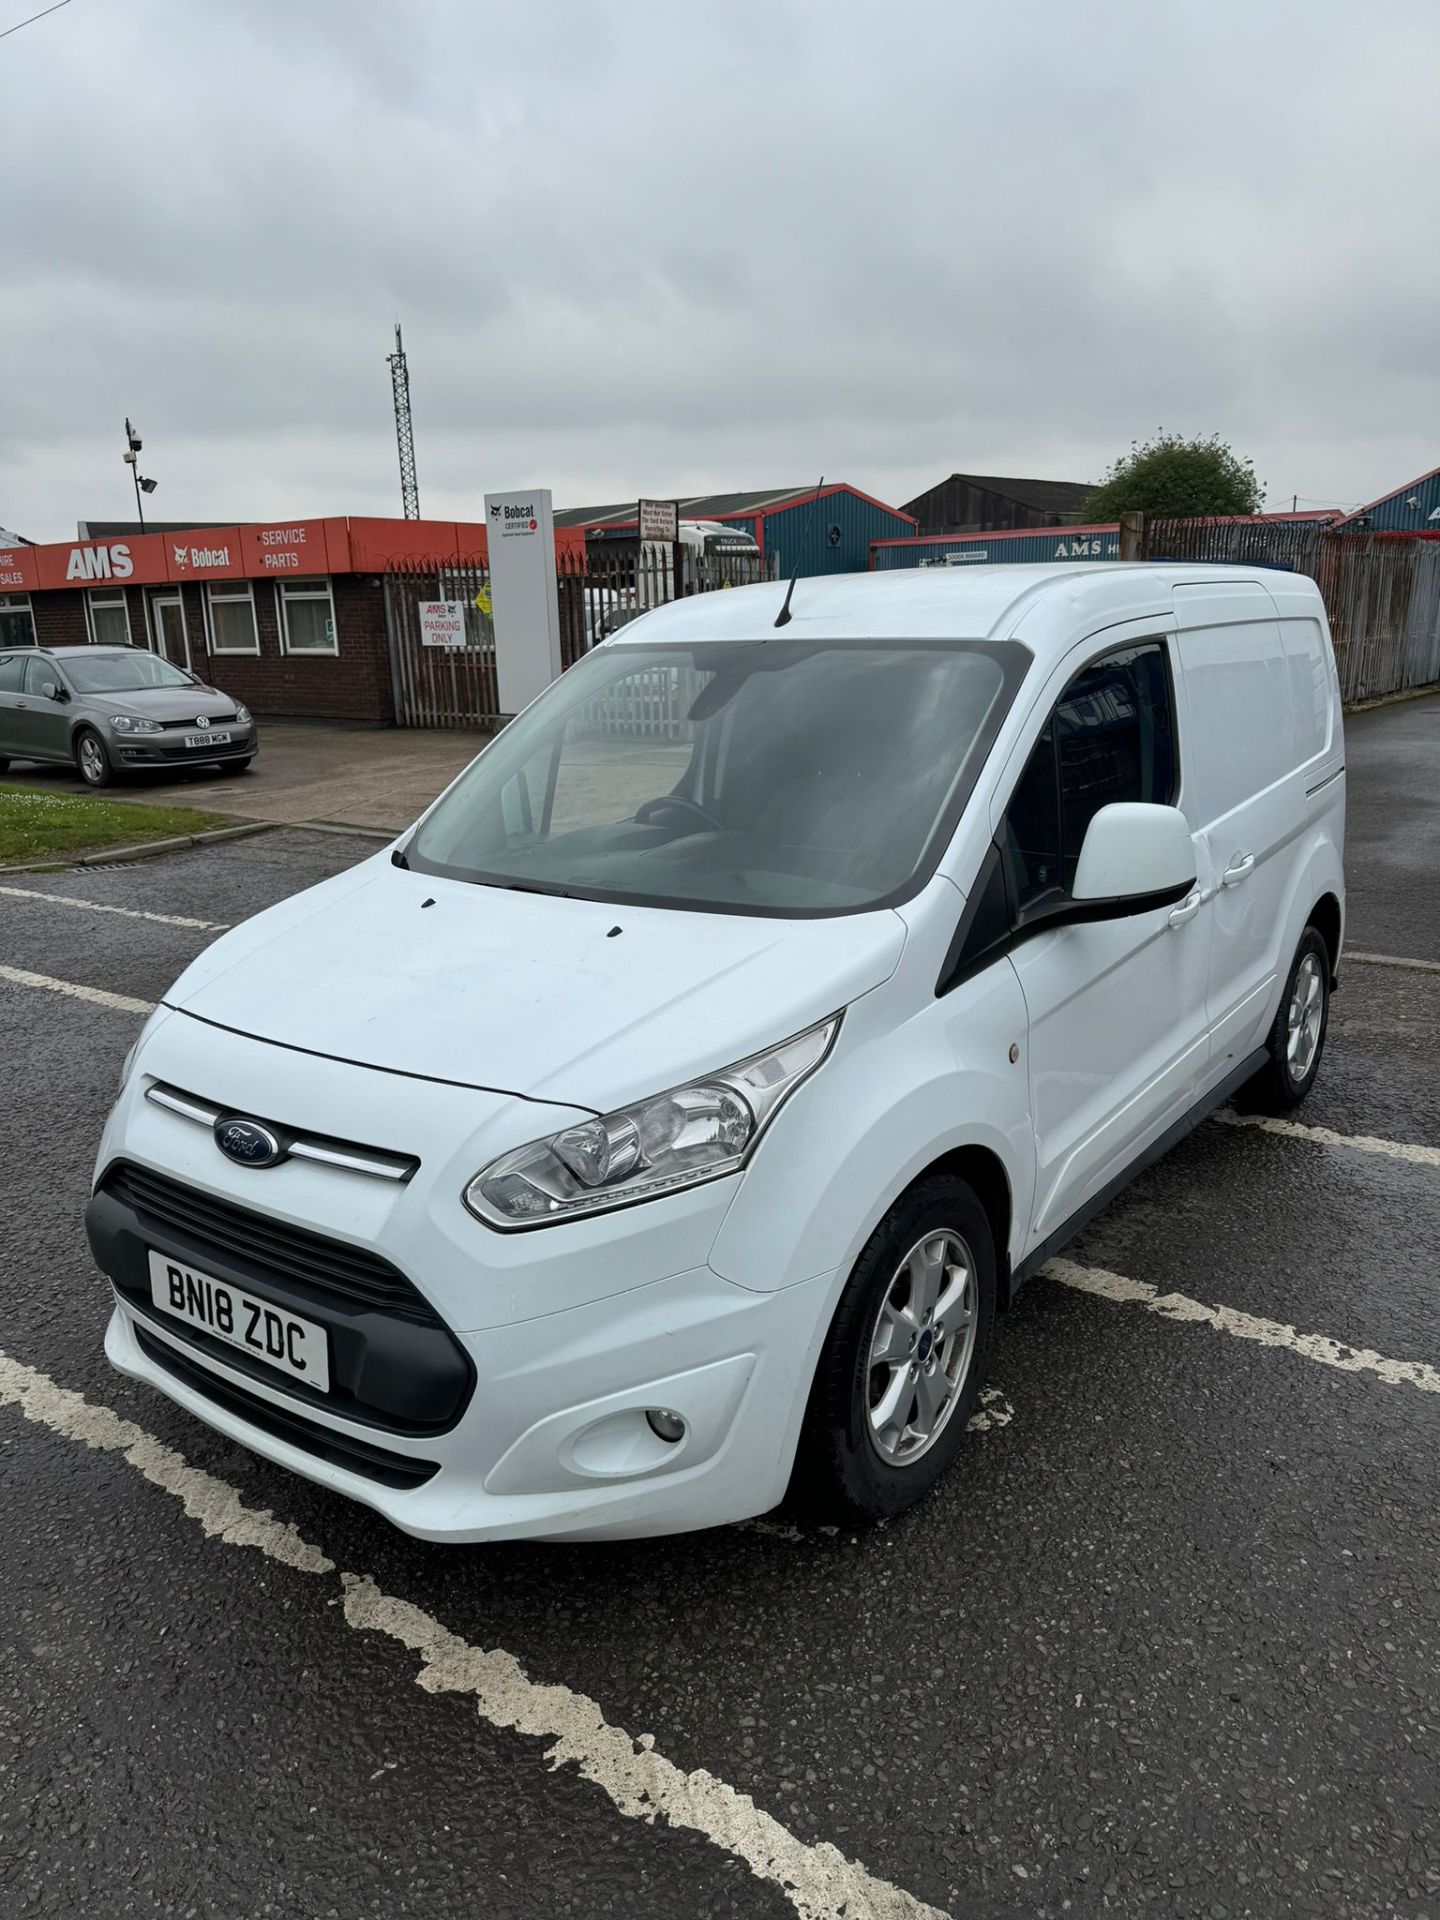 2018 18 FORD TRANSIT CONNECT LIMITED PANEL VAN - 75K MILES - EURO 6 - AIR CON - ALLOY WHEELS